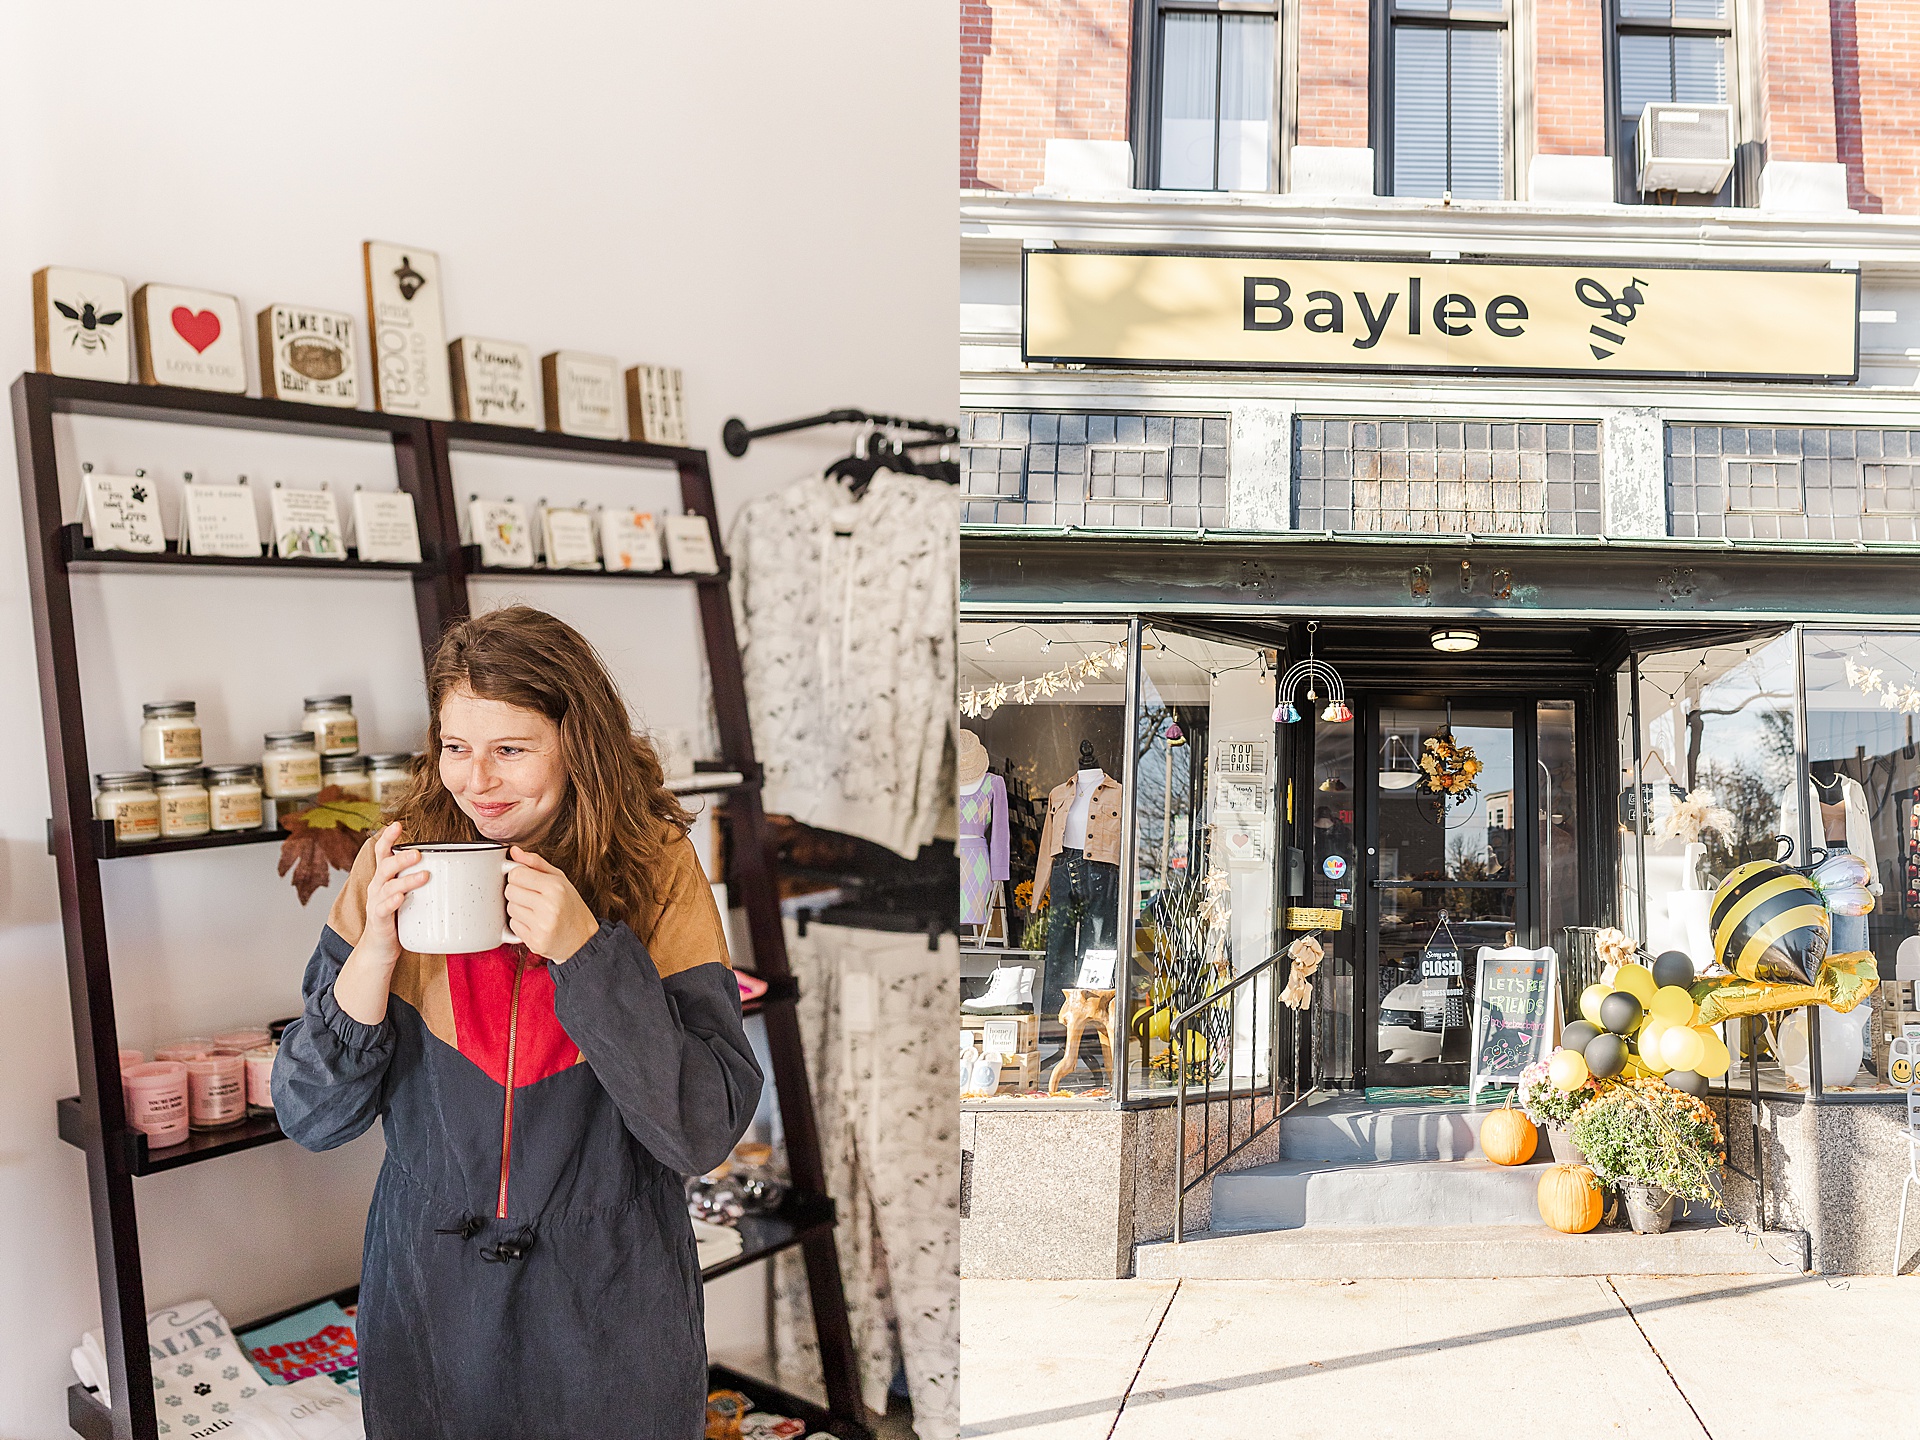 Baylee of Baylee Bee drinking coffee and front of Baylee Bee store in Natick Massachusetts